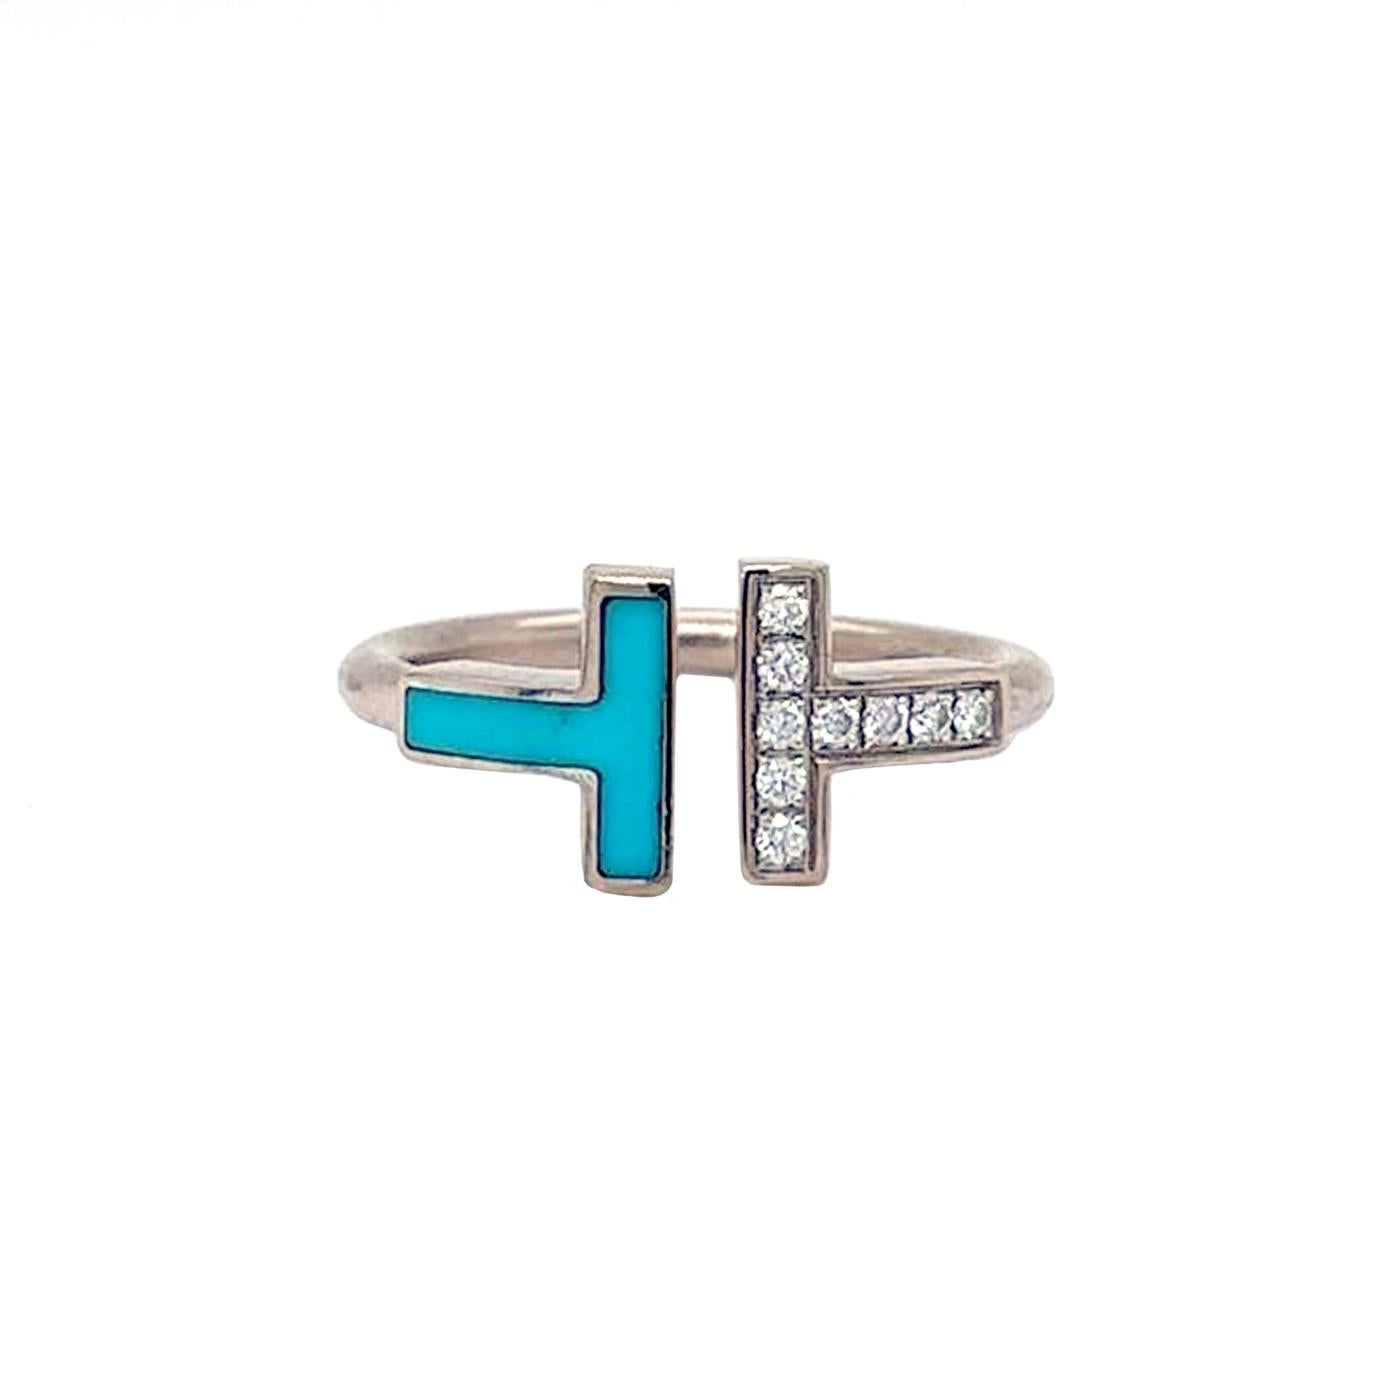 Modernist Tiffany & Co T Diamond & Turquoise Wire Ring 18k White Gold with Round Diamonds